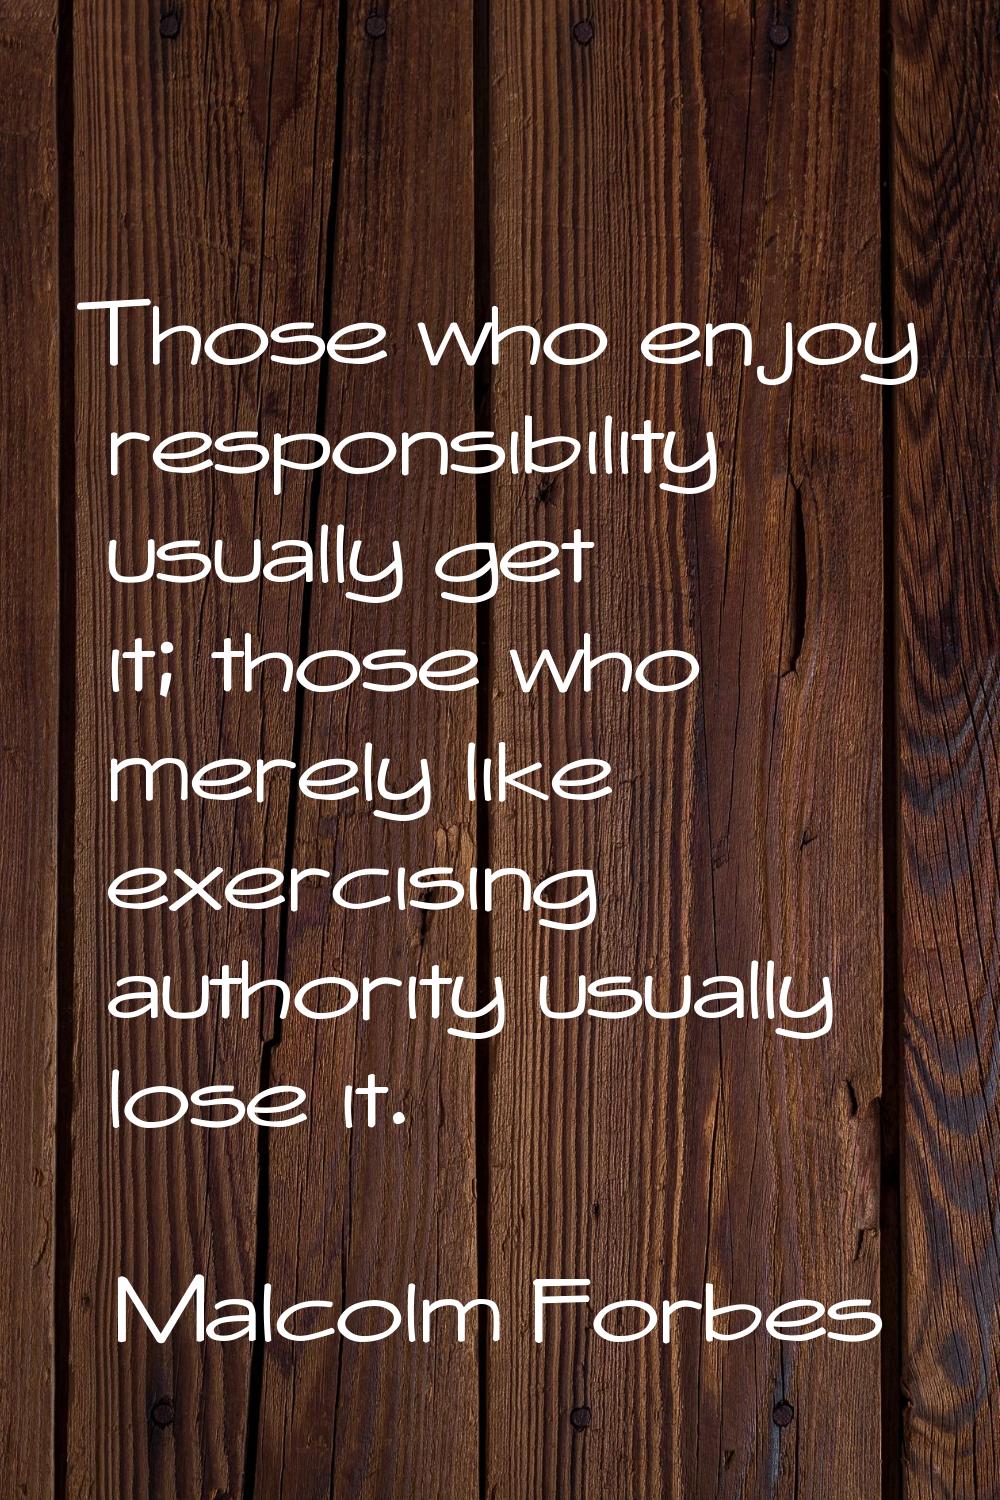 Those who enjoy responsibility usually get it; those who merely like exercising authority usually l